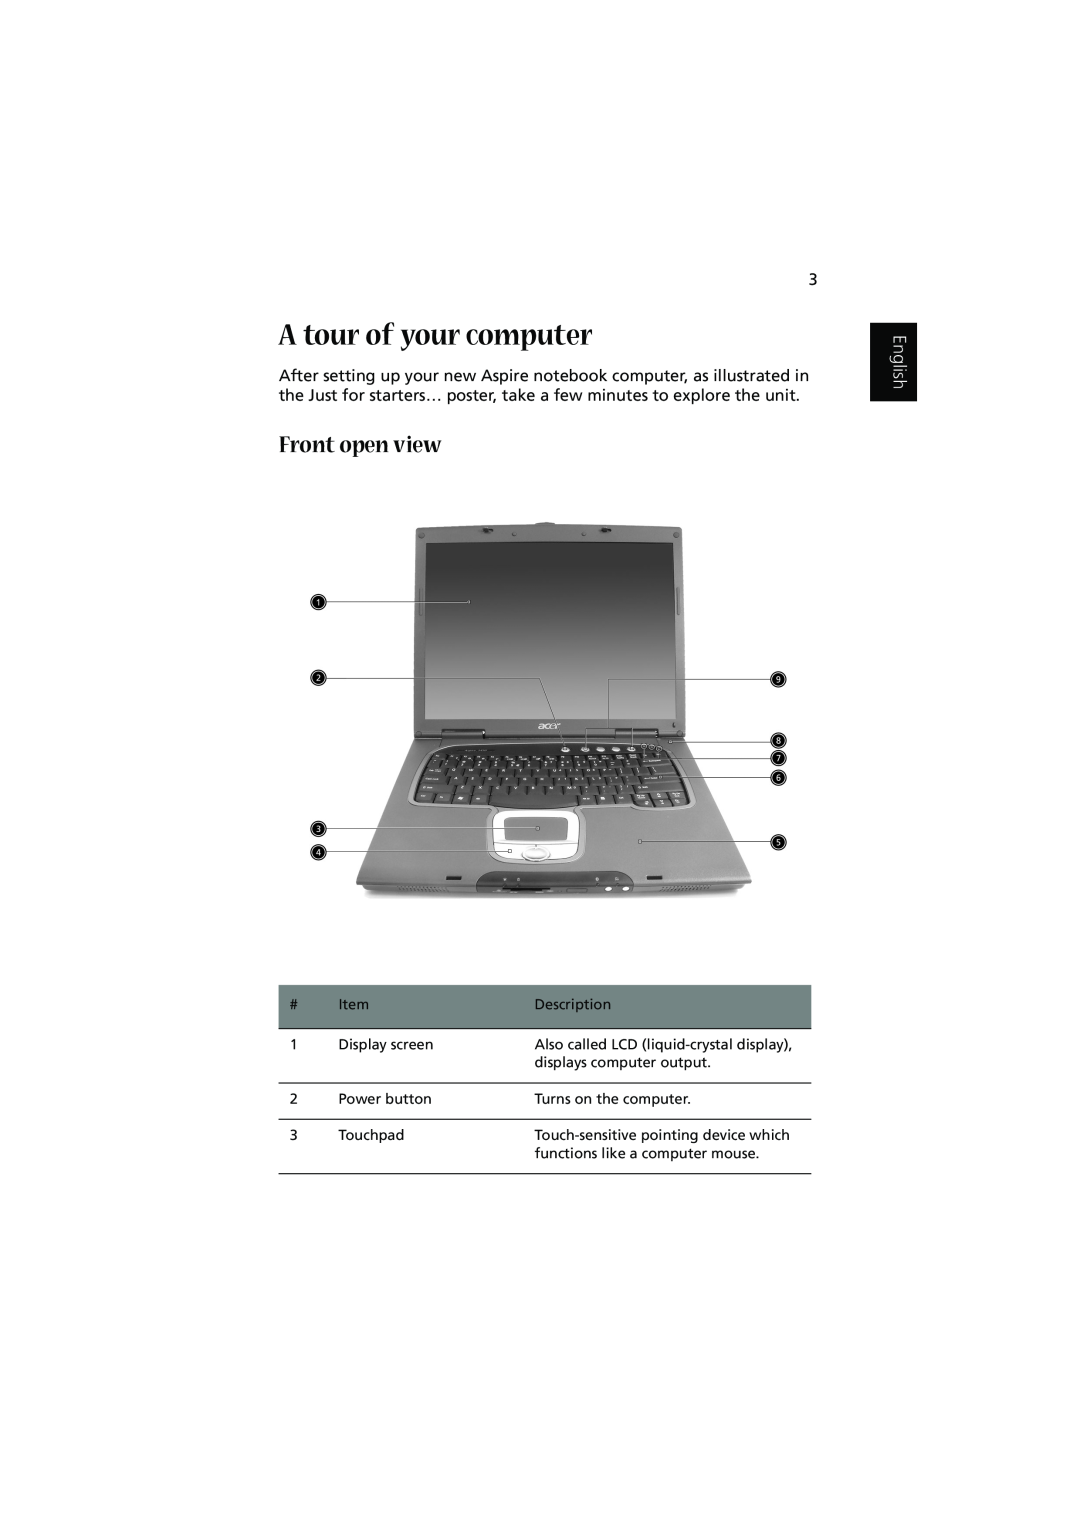 Acer 1450 manual A tour of your computer, Front open view, English 